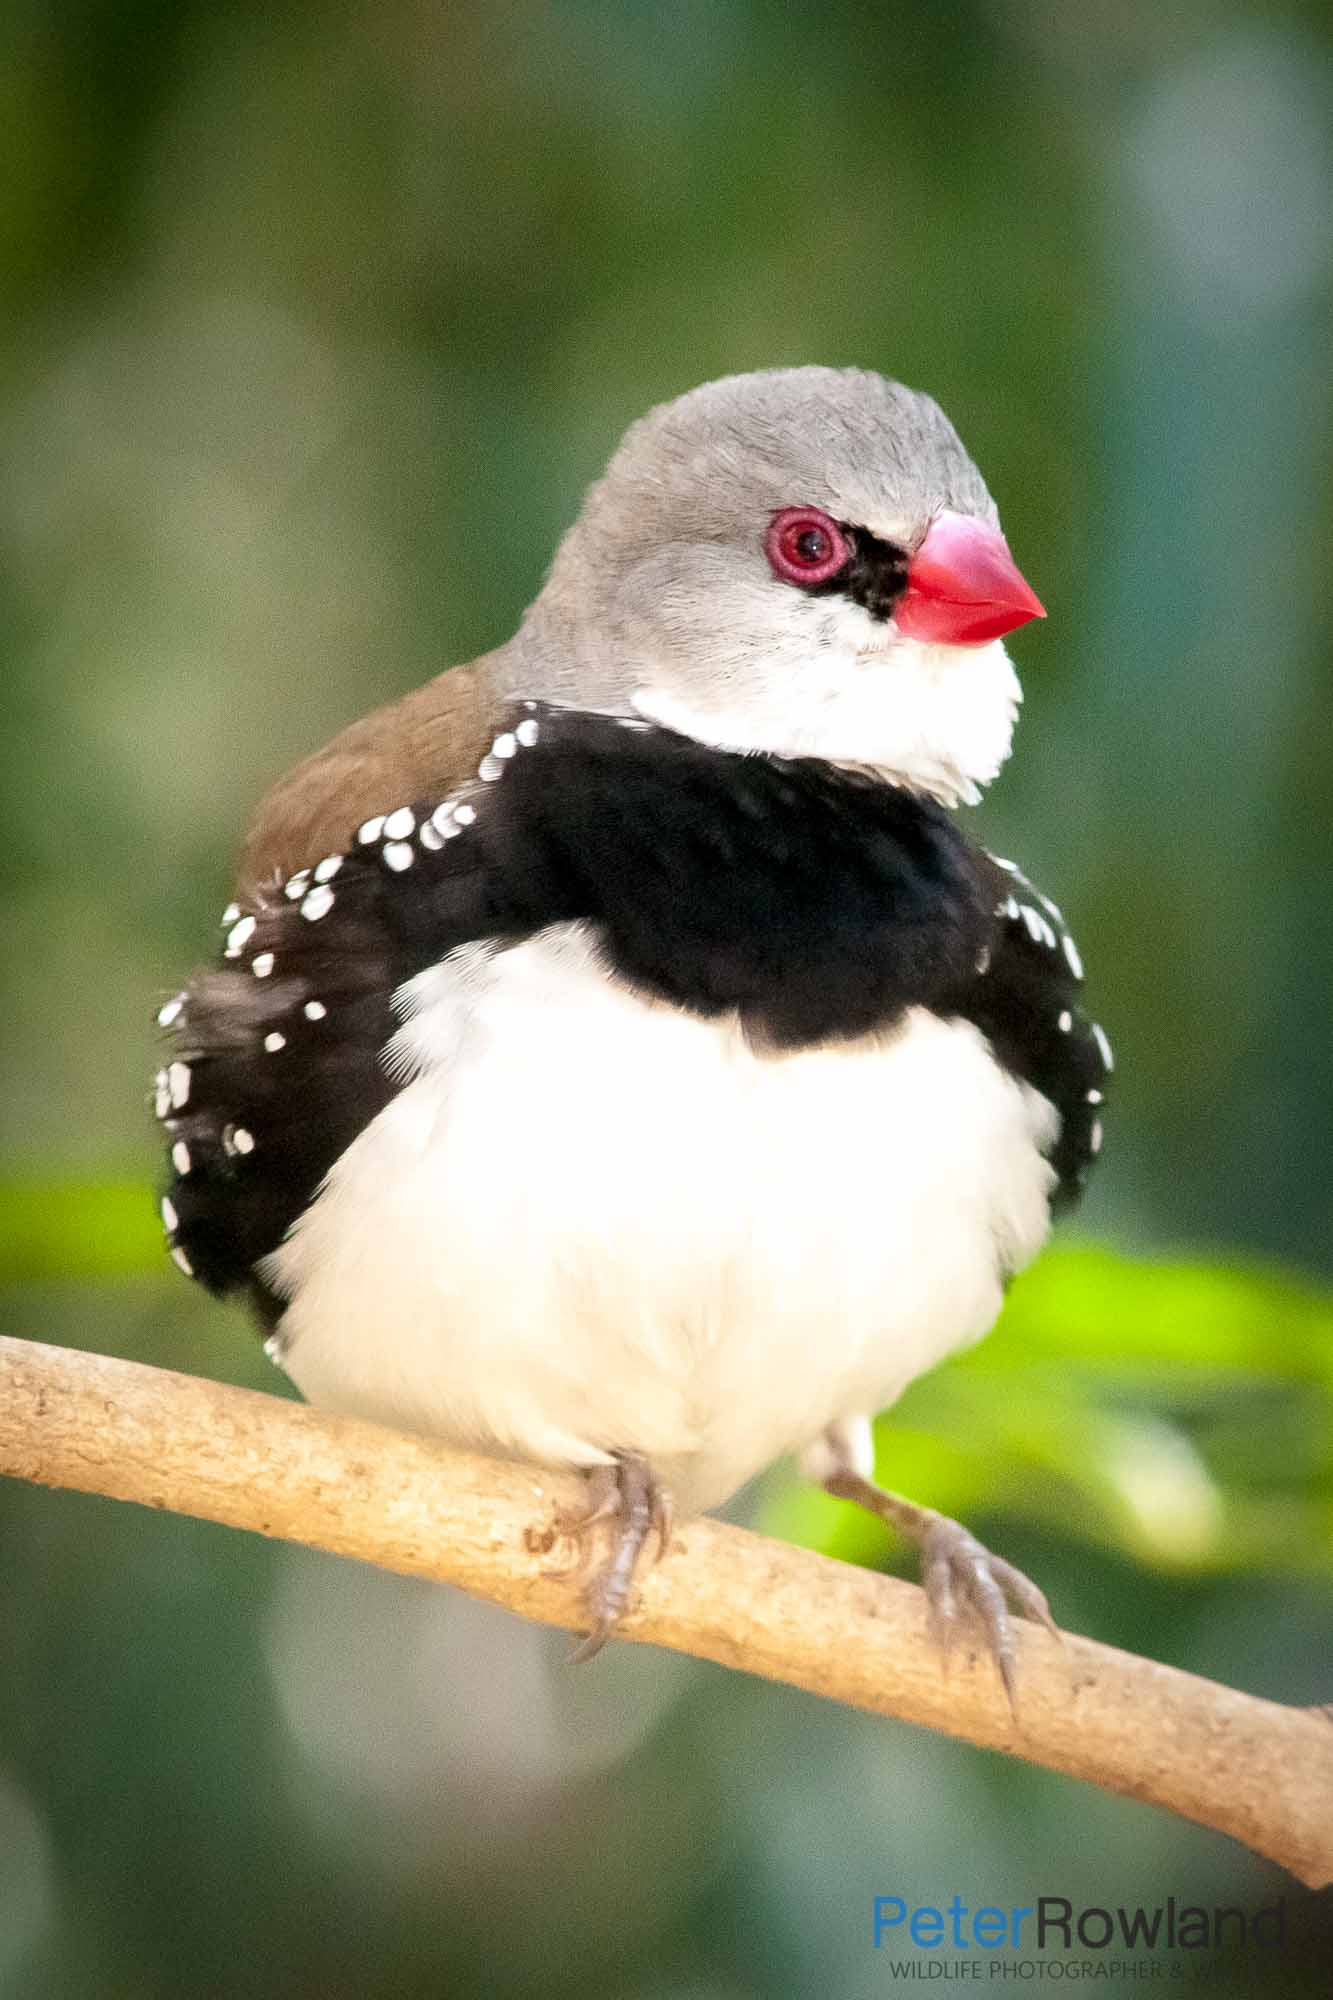 A Diamond Firetail perched on a small branch